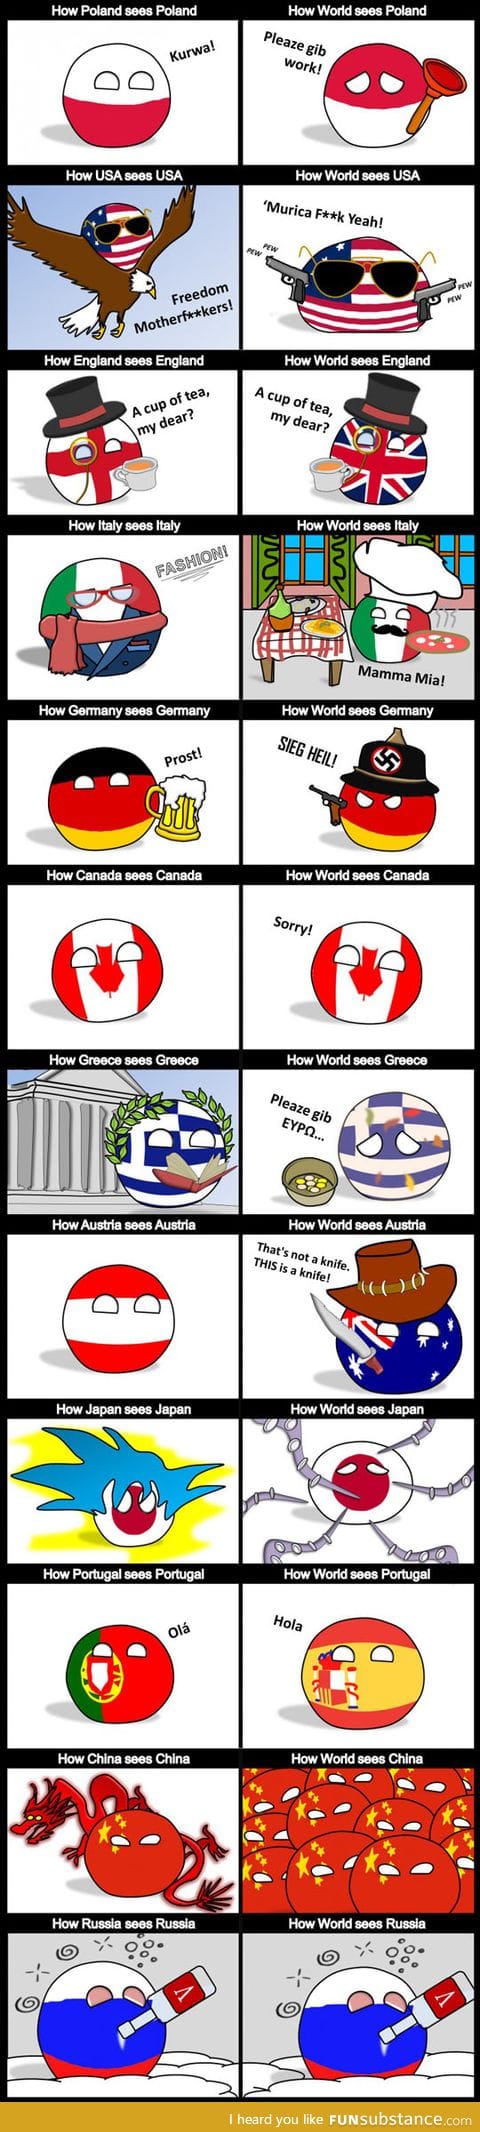 How the world sees countries